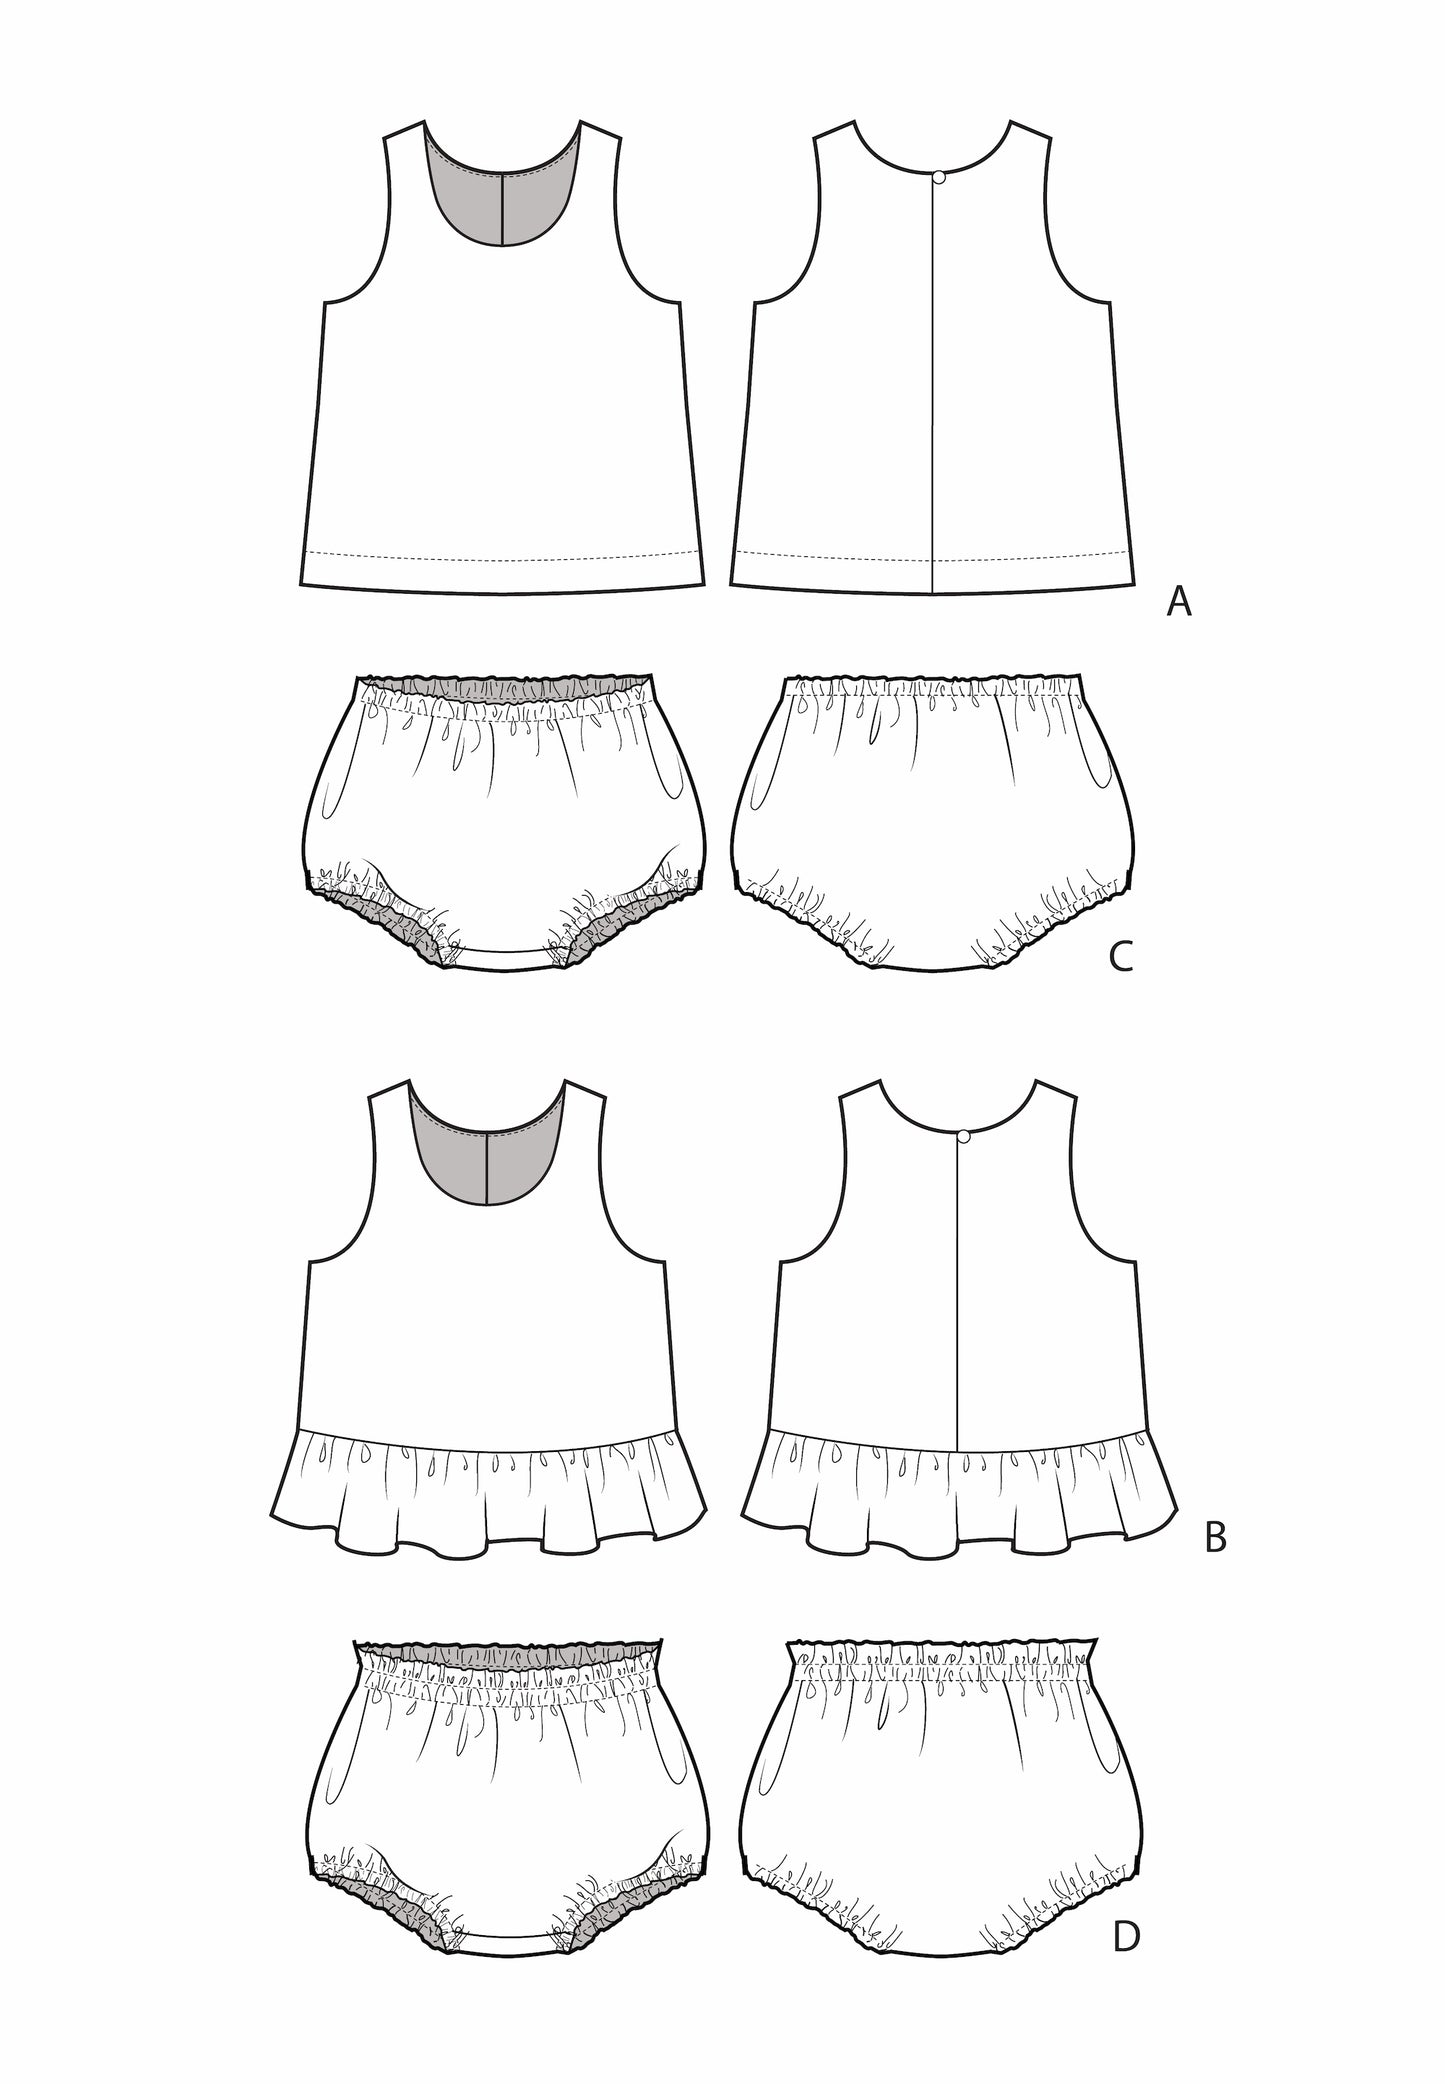 Holly Tank & Bloomers Set